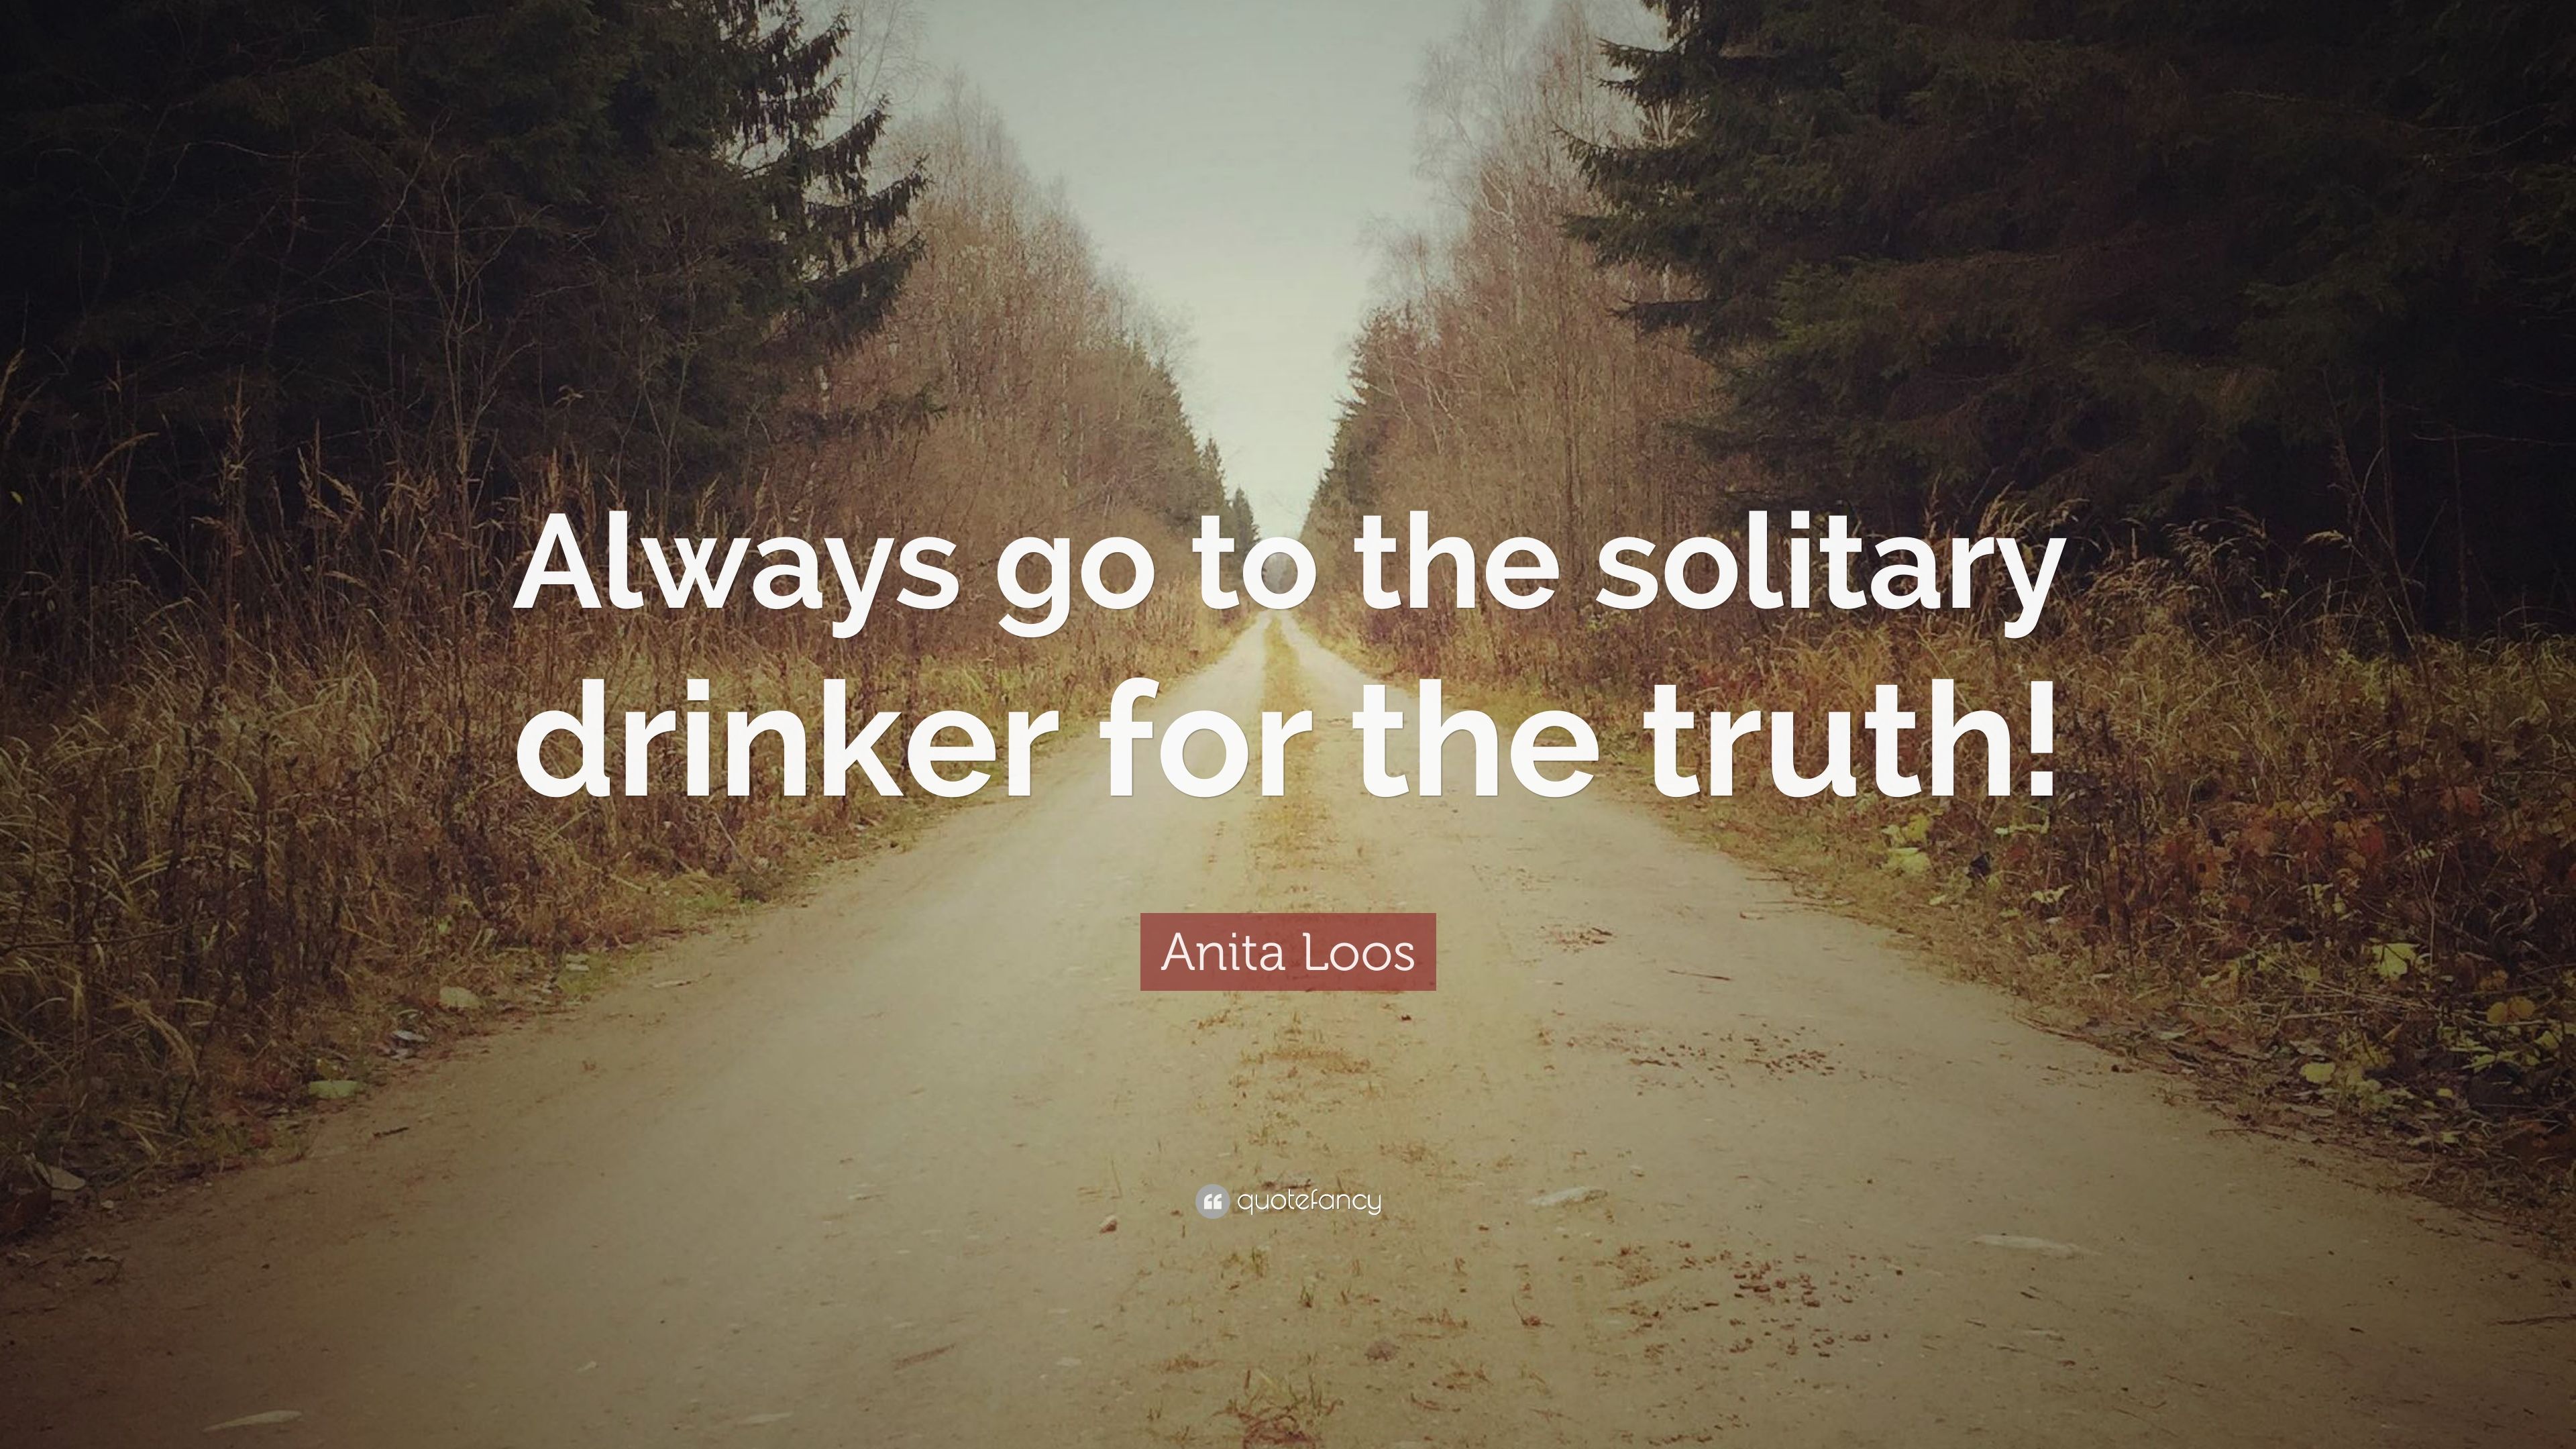 Anita Loos Quote: “Always go to the solitary drinker for the truth!” (7 wallpaper)